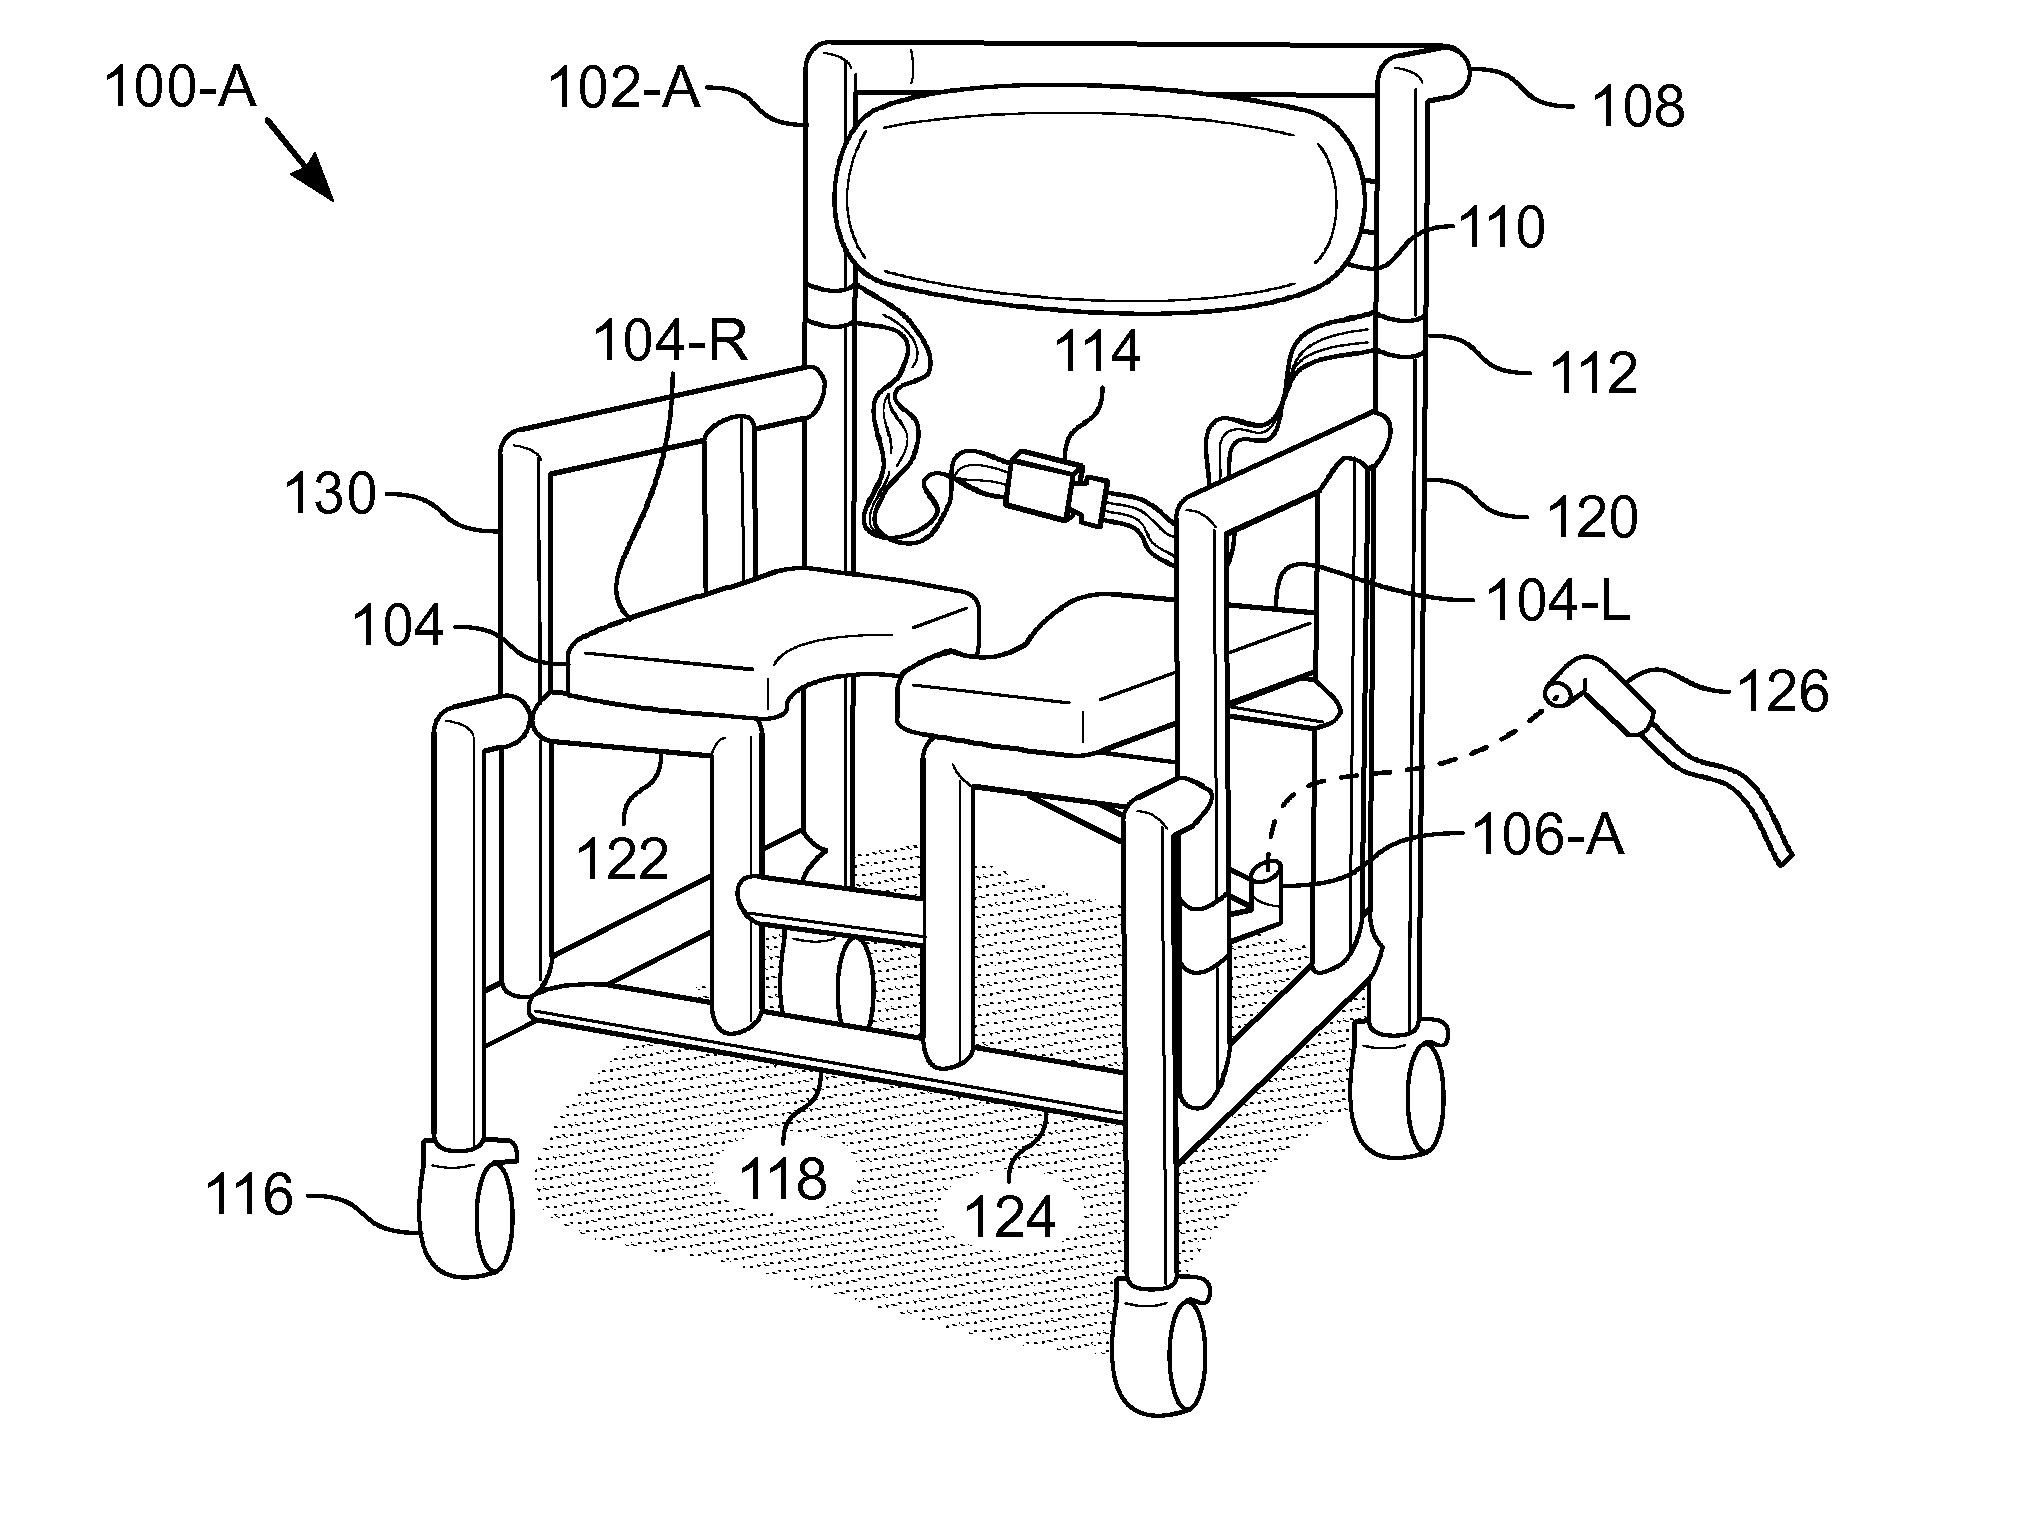 Full perineal wash system with removable seat